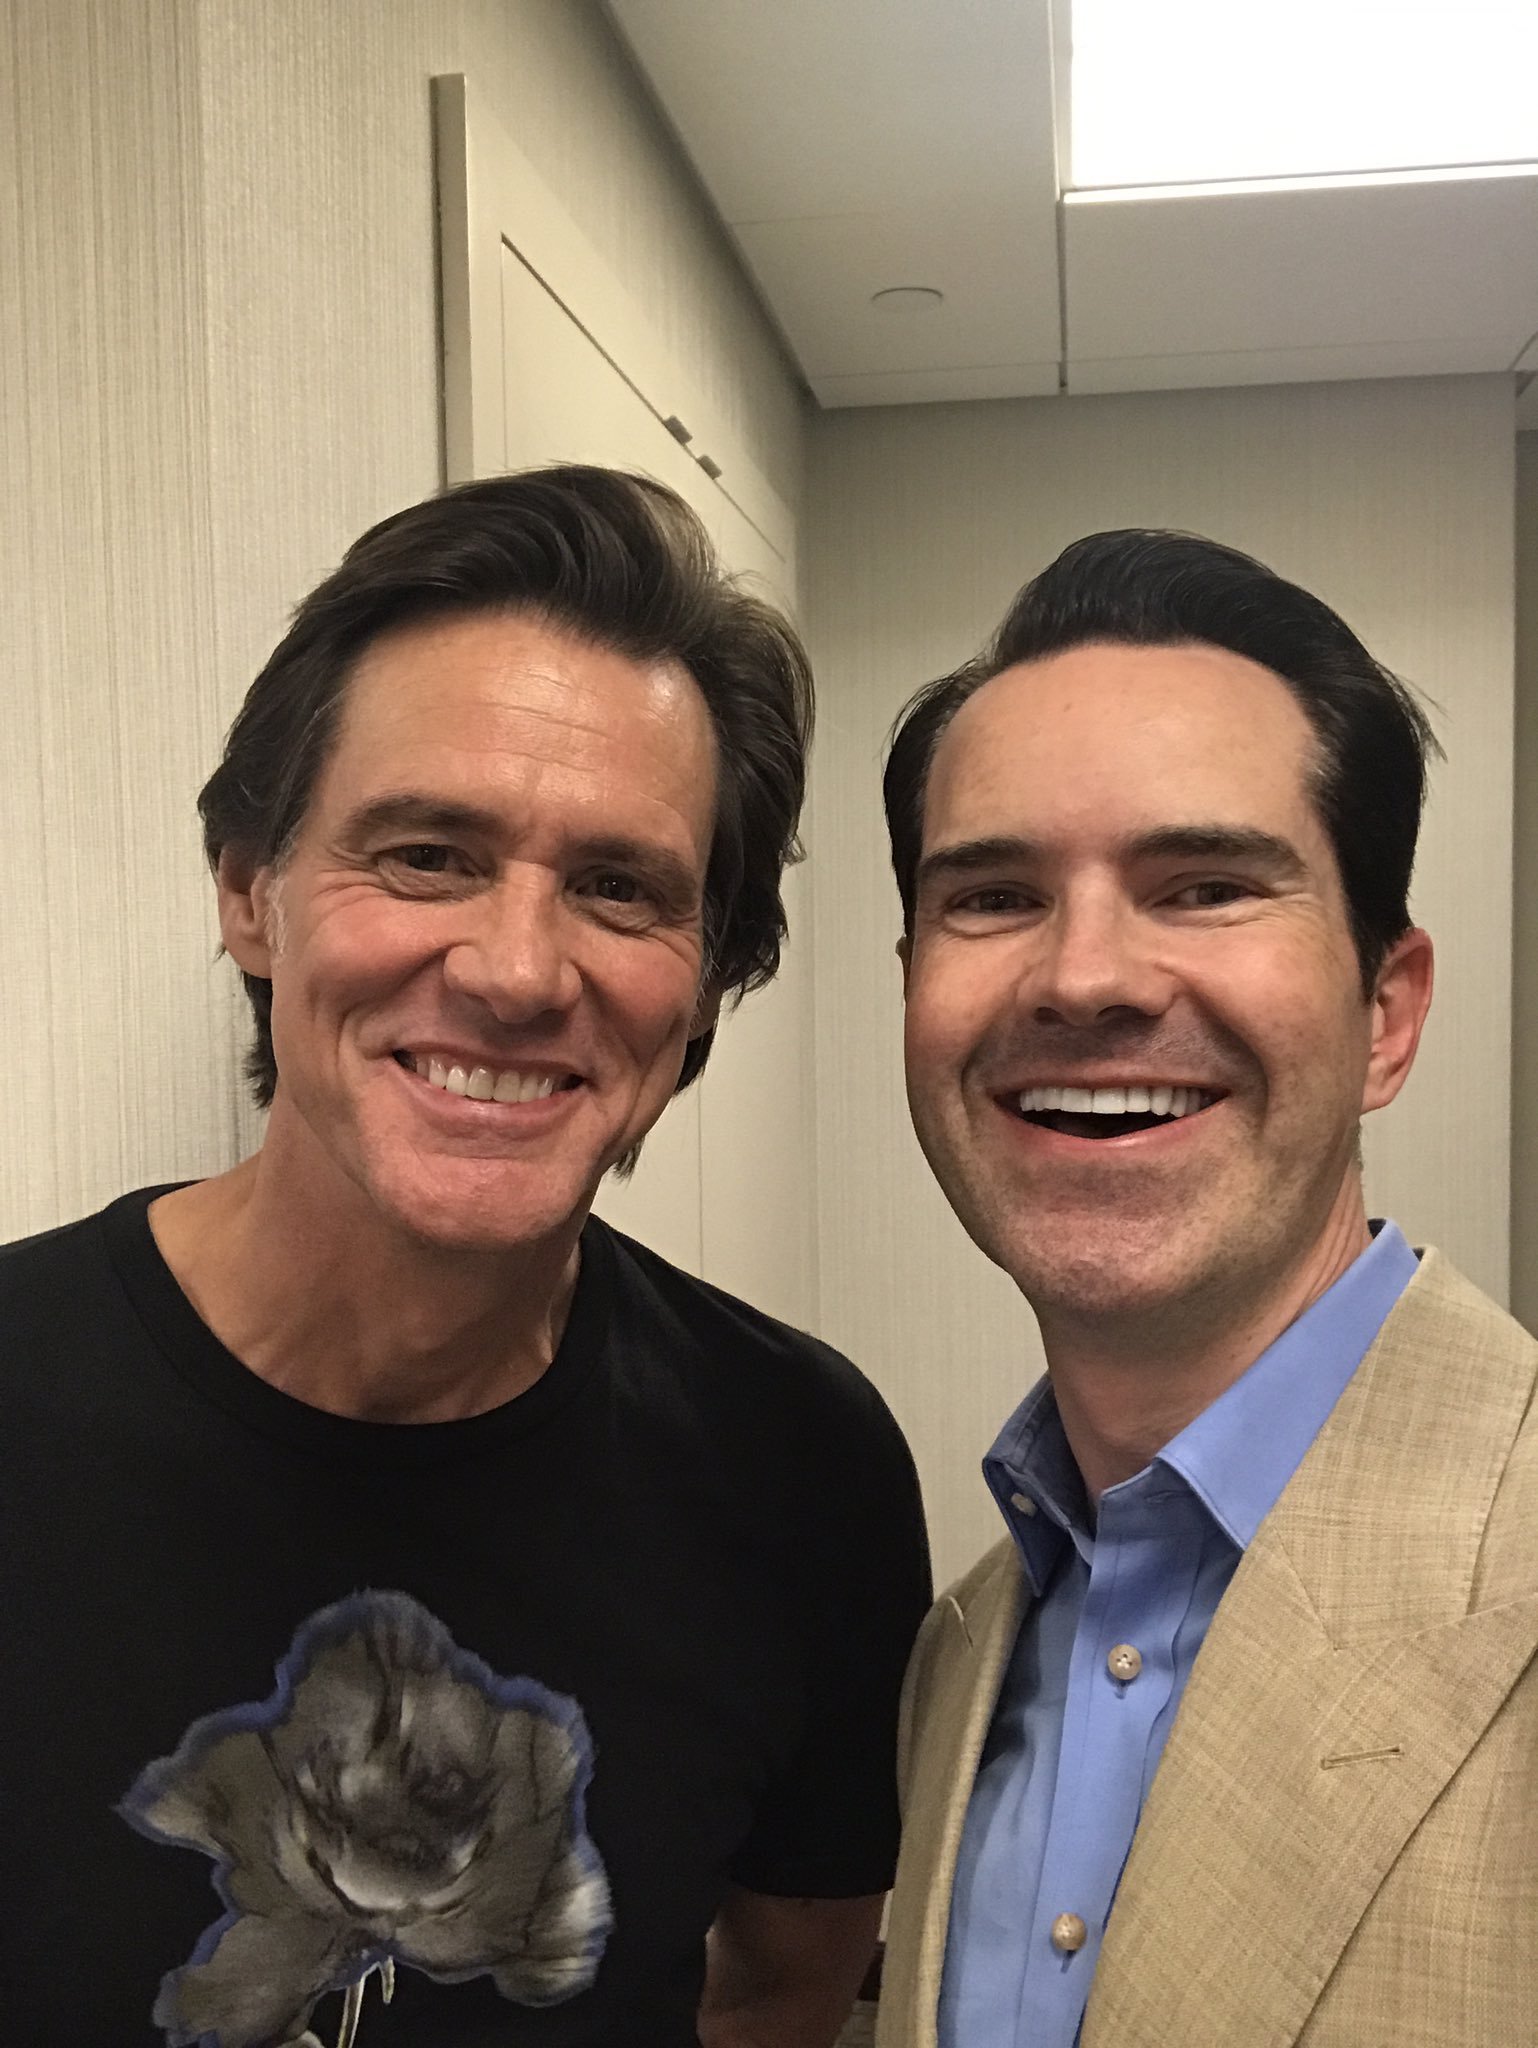 One Jim is good, but two is better. - The photo, Jimmy Carr, Jim carrey